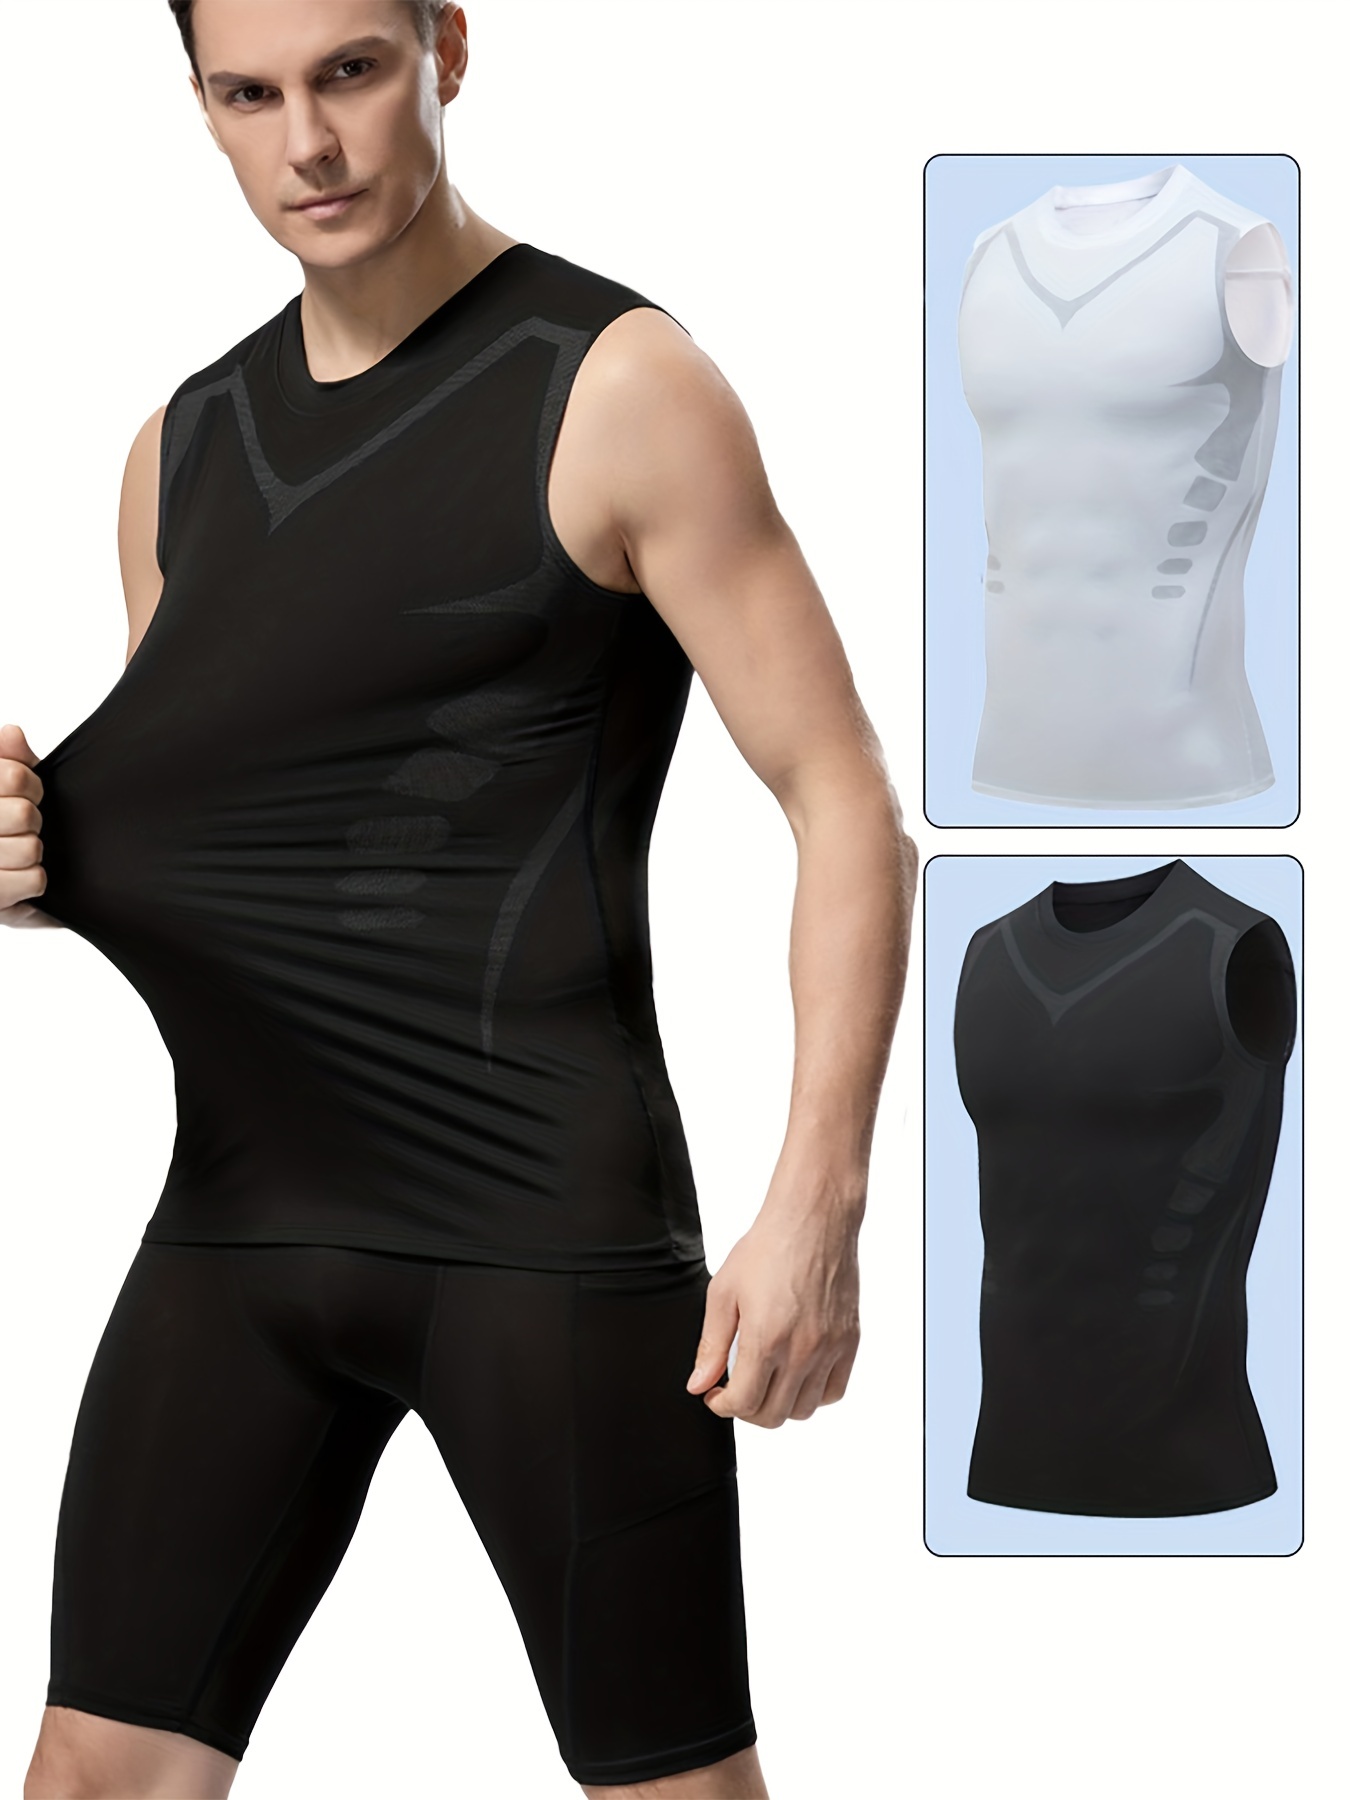 Ropa Deportiva Hombres